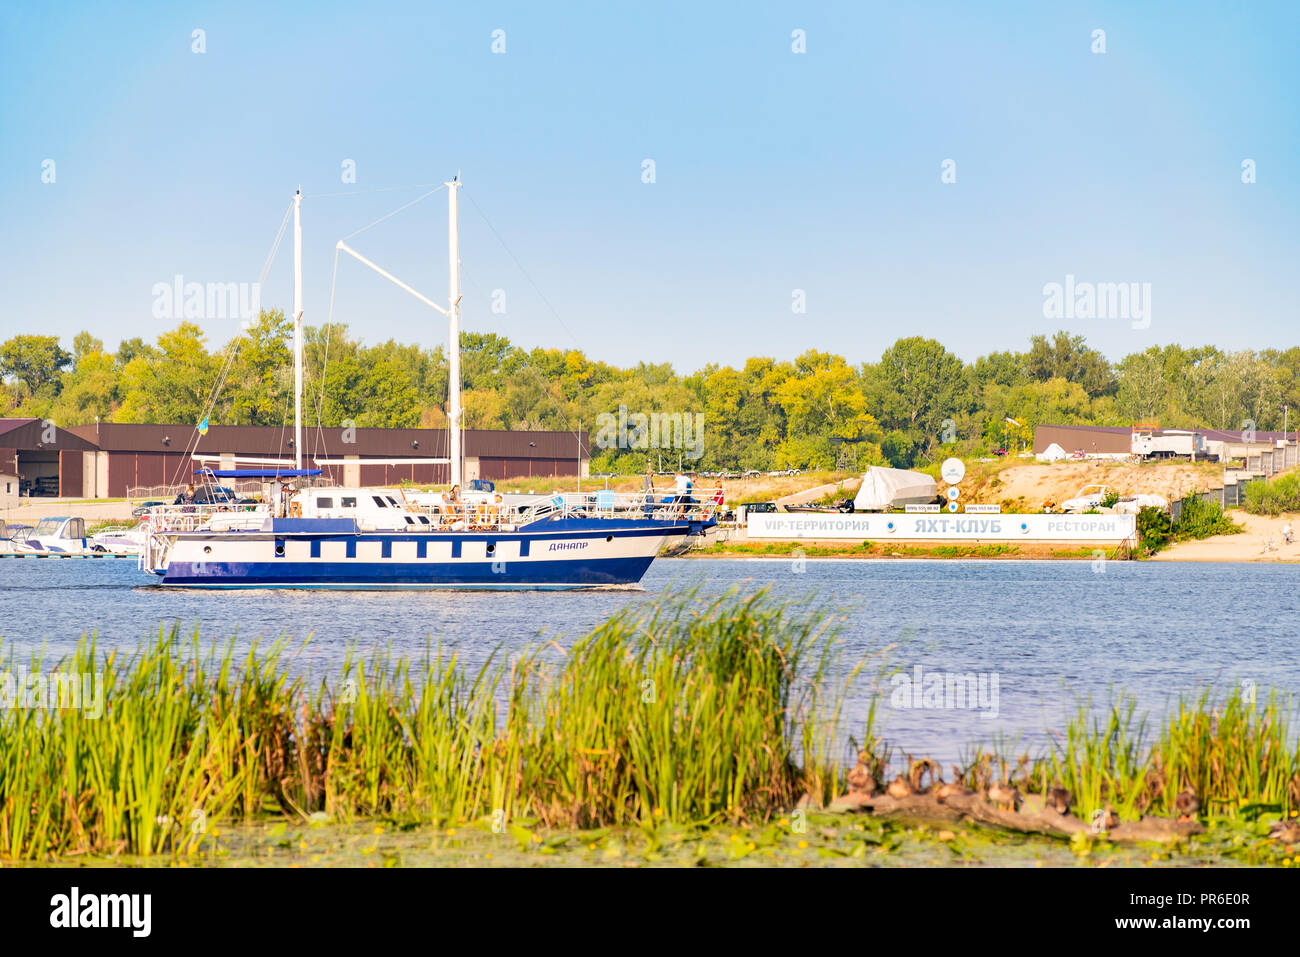 Kiev / Ukraine - August 31, 2018 - The 'Danapr' boat, navigating on the Dnieper river is ariving at the Obolon Yacht Club of Kiev, Ukraine, during a c Stock Photo